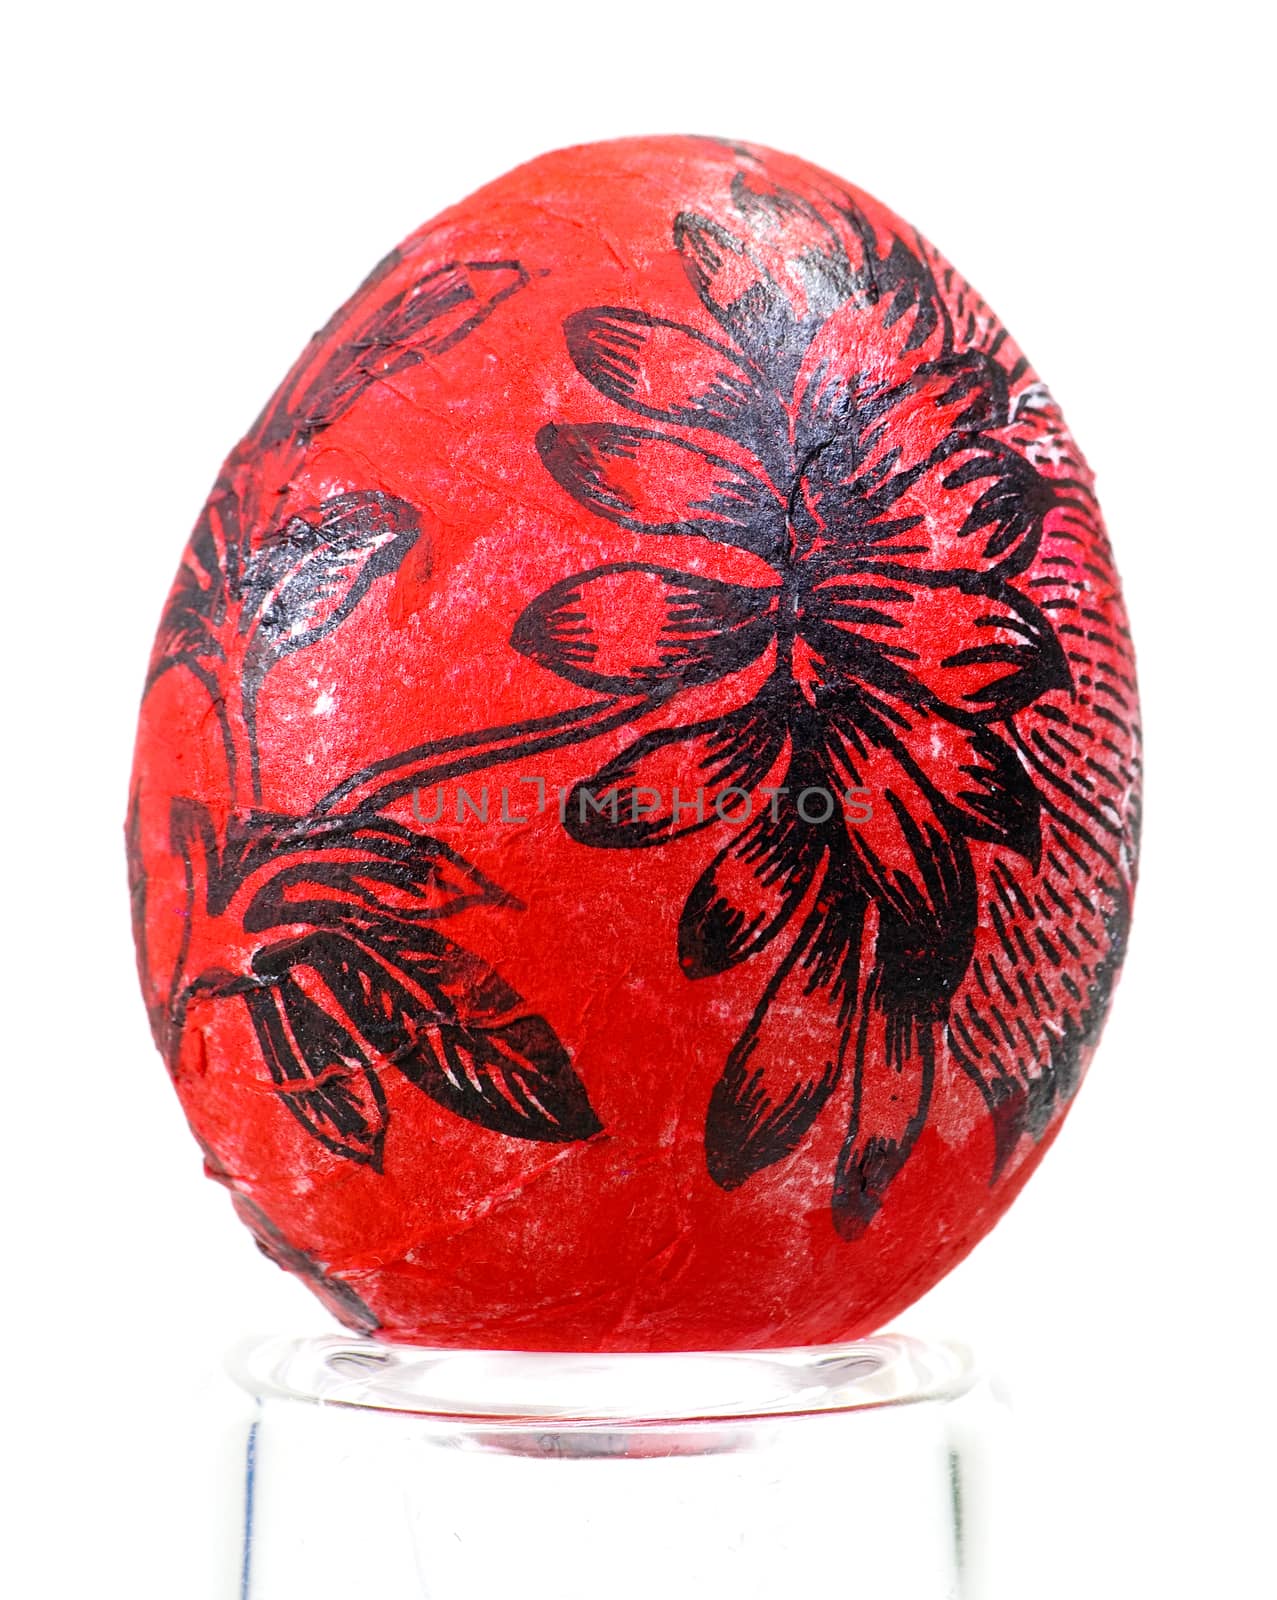 Egg painted by hand in stand isolated on white background by mrakor